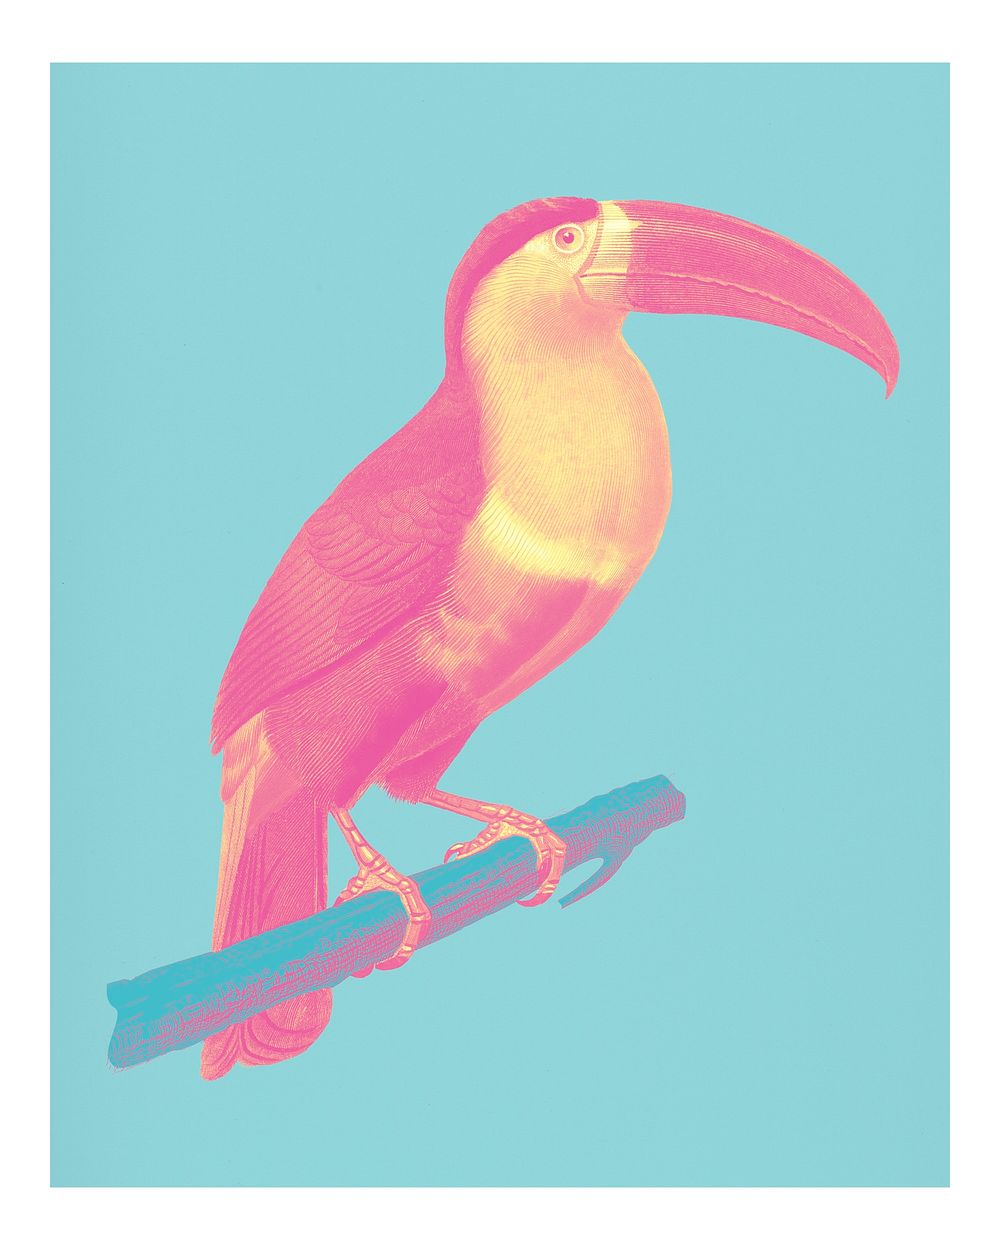 Vintage Toucan (Ramphastos) illustration wall art print and poster.